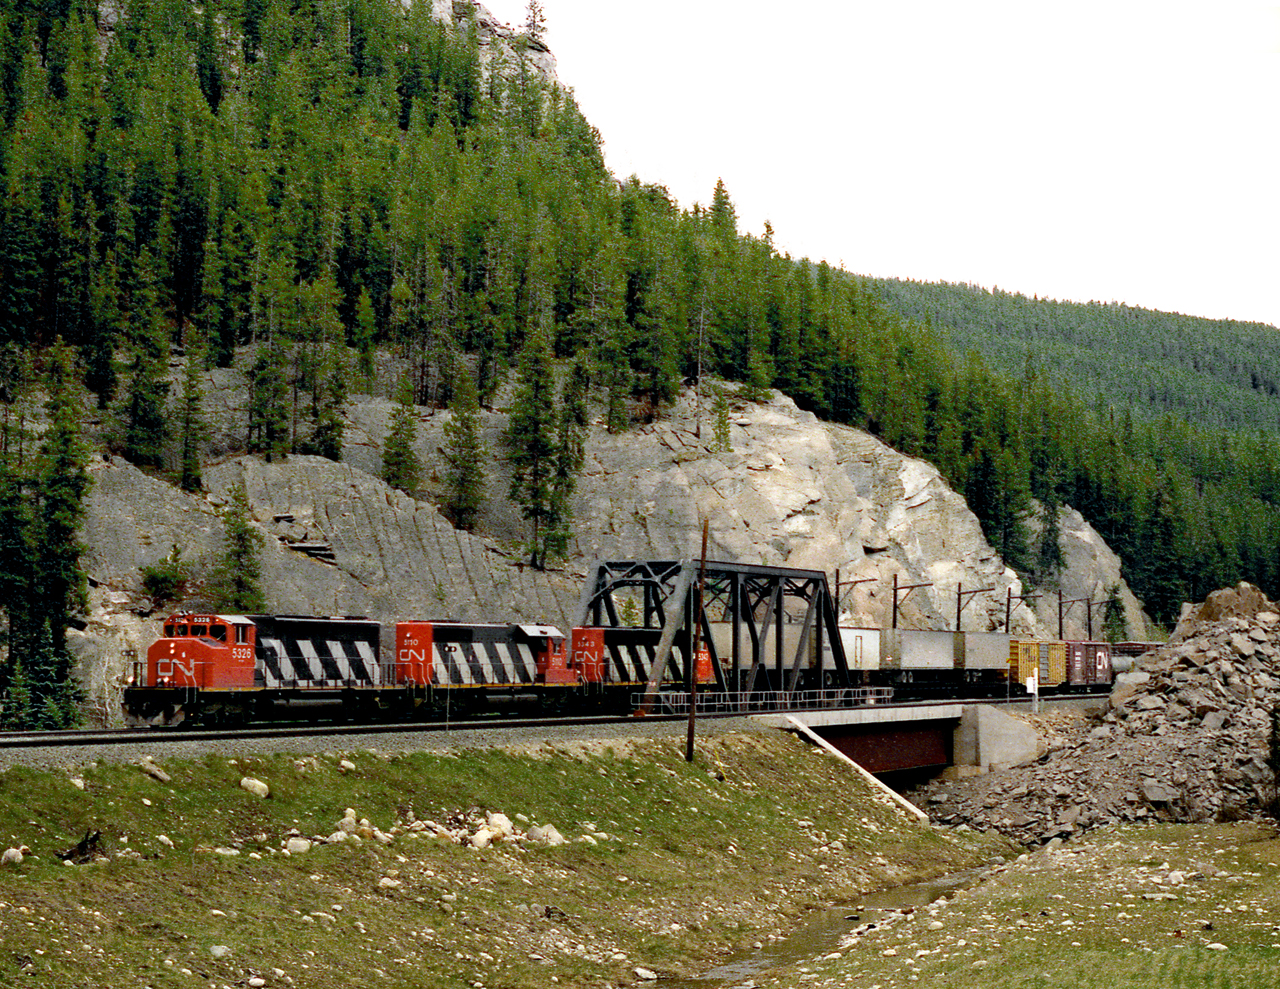 Westbound 201 just out of Jasper makes a crossing of the Miette River which it will follow to the Yellowhead Pass